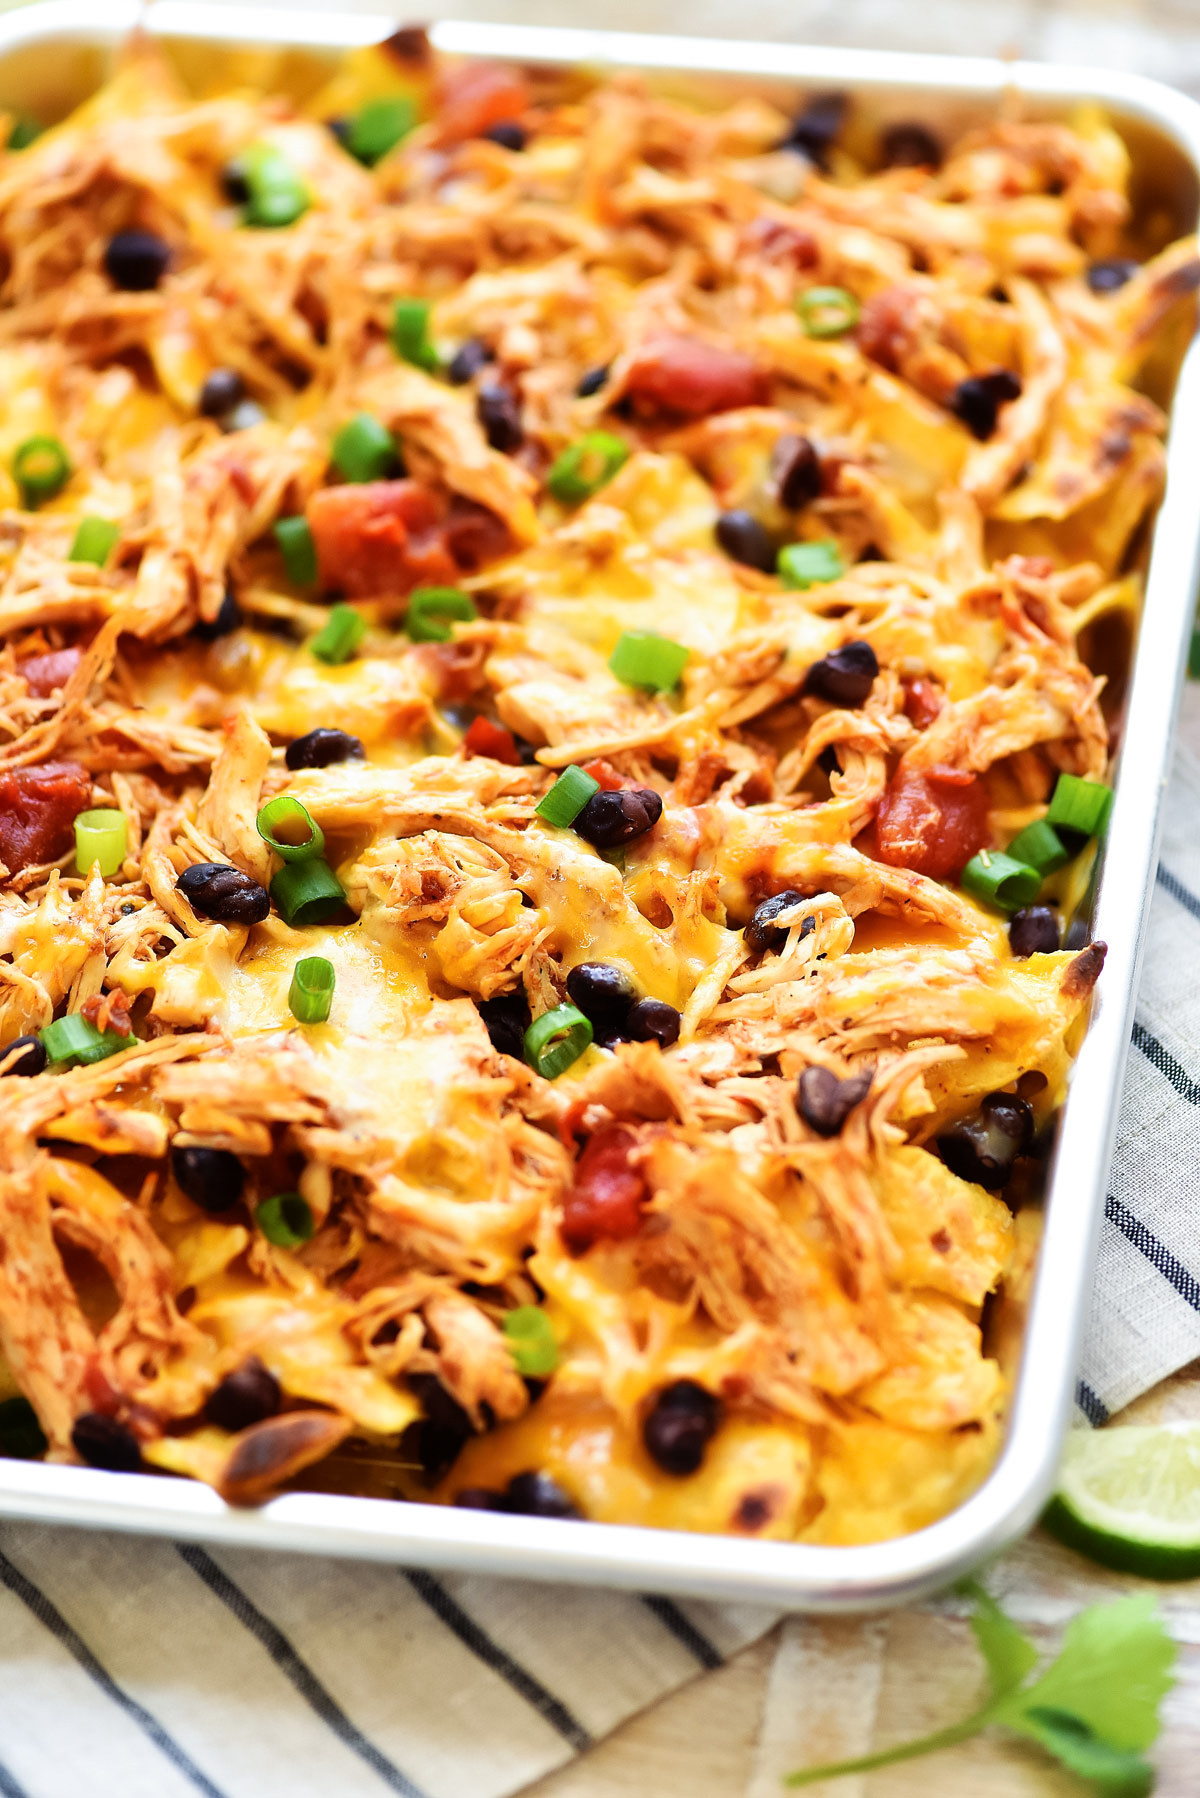 A sheet pan of cheesy nachos topped with shredded chicken, black beans, tomato, and green onions